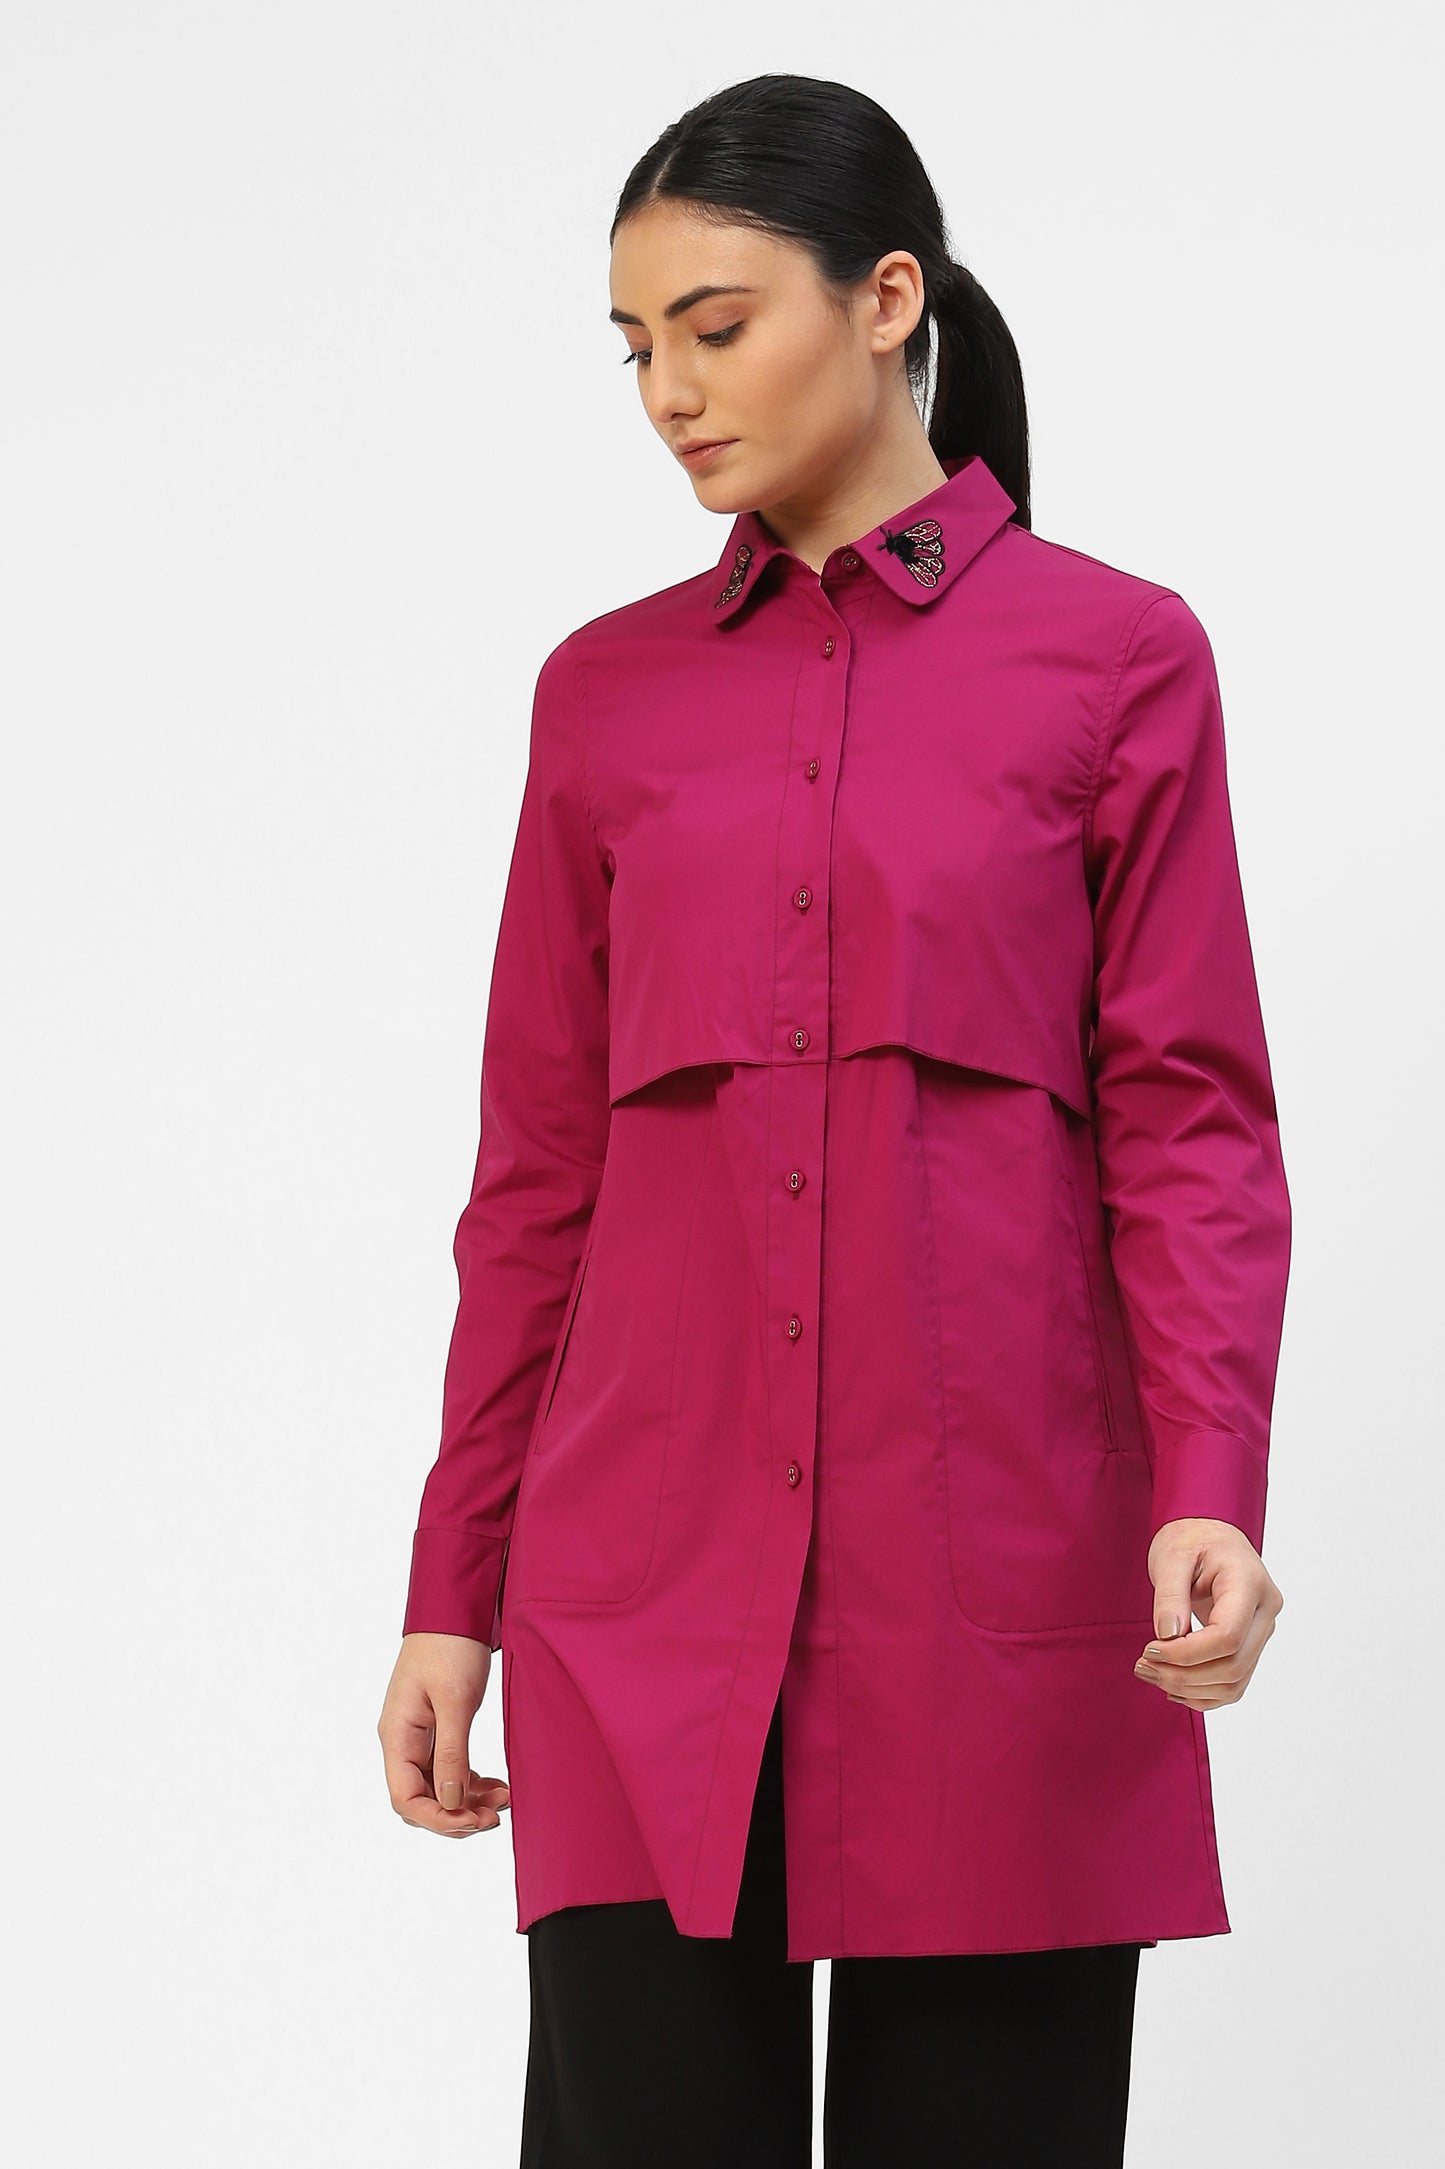 Womens Long Button Down Shirt With Embroidered Collar